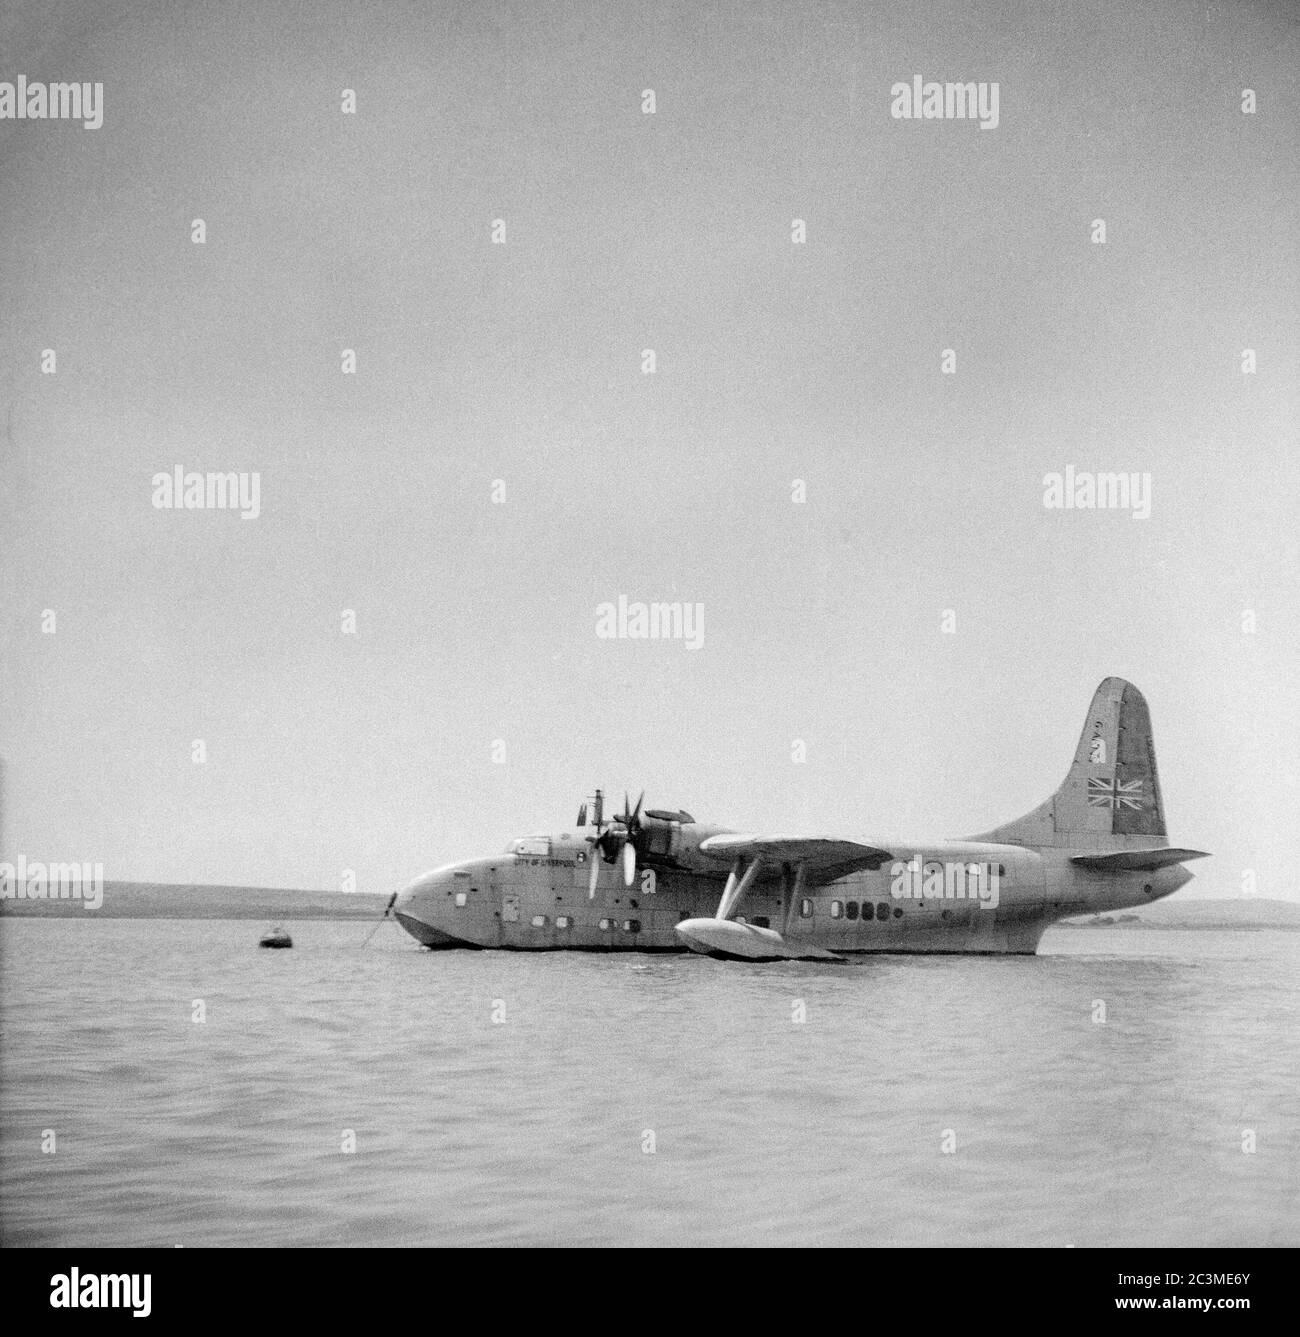 Vintage black and white photograph of a Short S.45 Solent Sea Plane, registration G-AKNS. Taken in 1950. Stock Photo